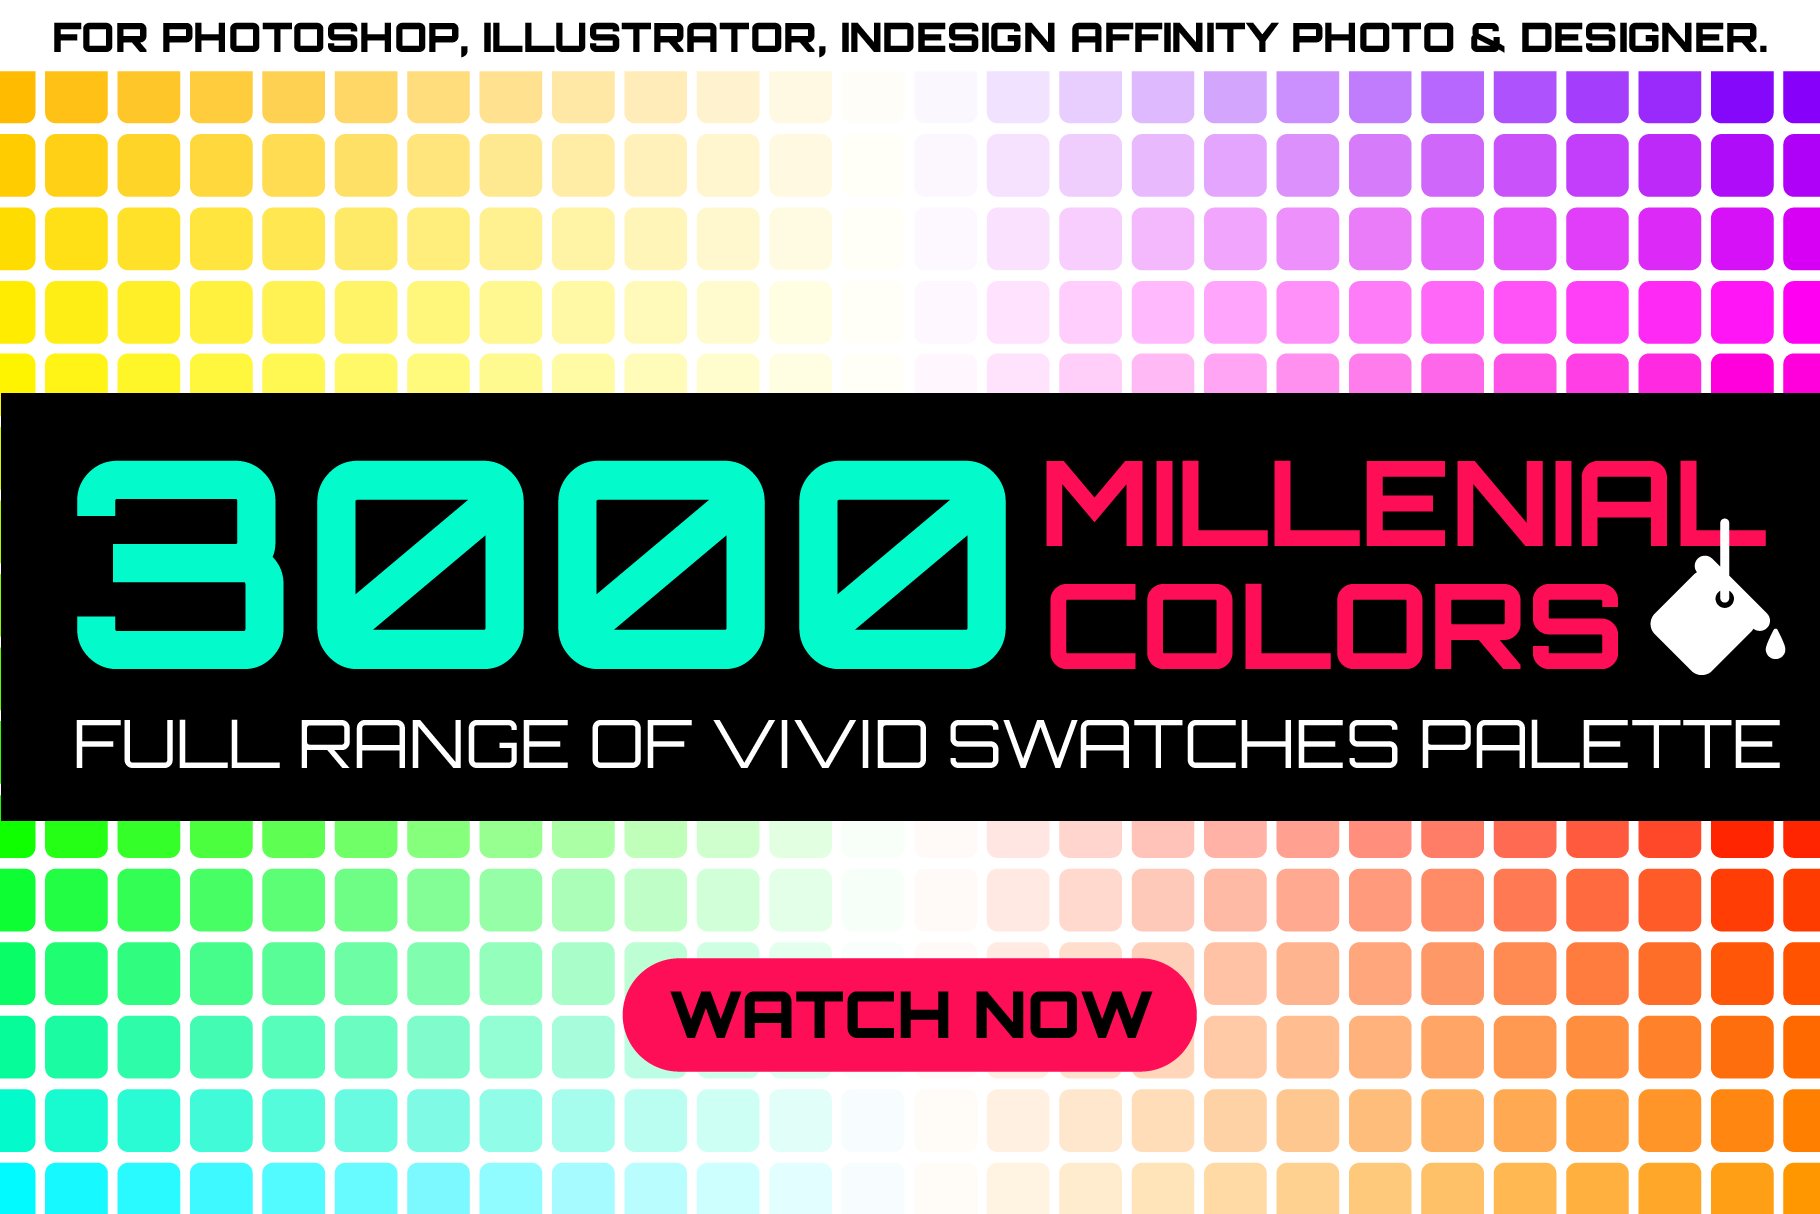 3000 millenial color swatches setcover image.